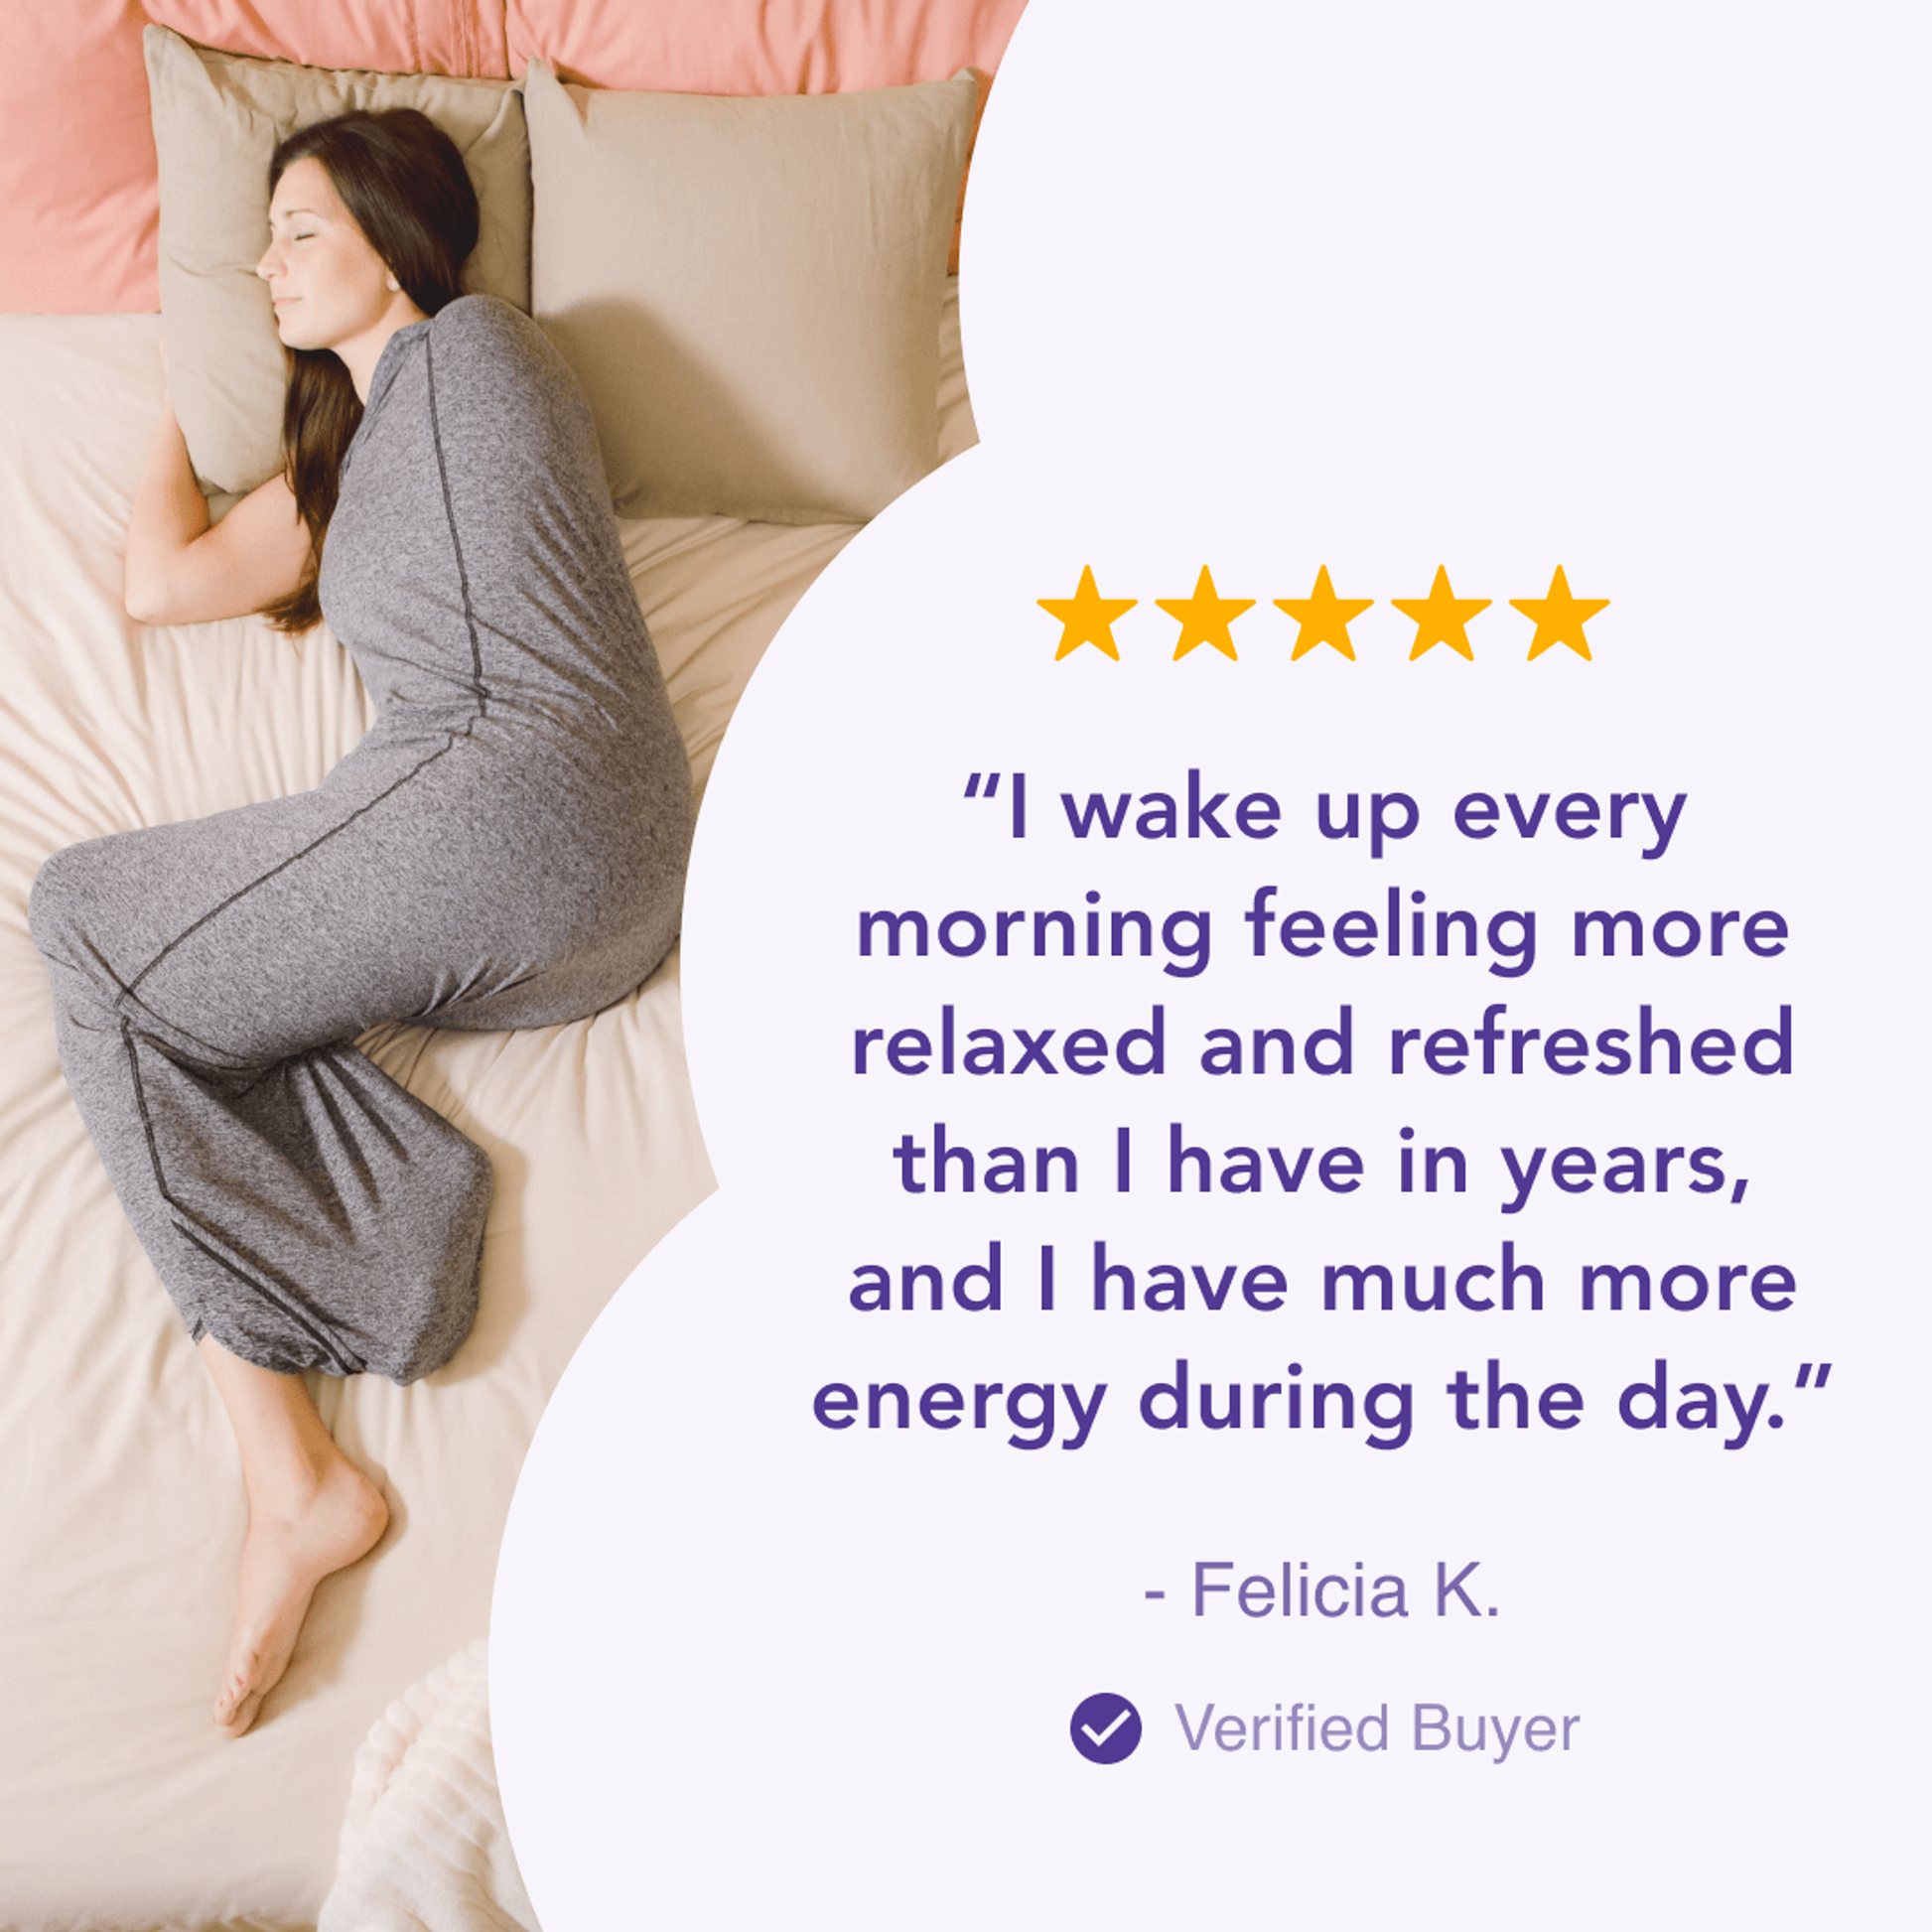 image of woman laying in bed with sleep pod move on with a customer quote that reads "I wake up every morning, feeling more relaxed, and refreshed than I have in years, and I have much more energy during the day."